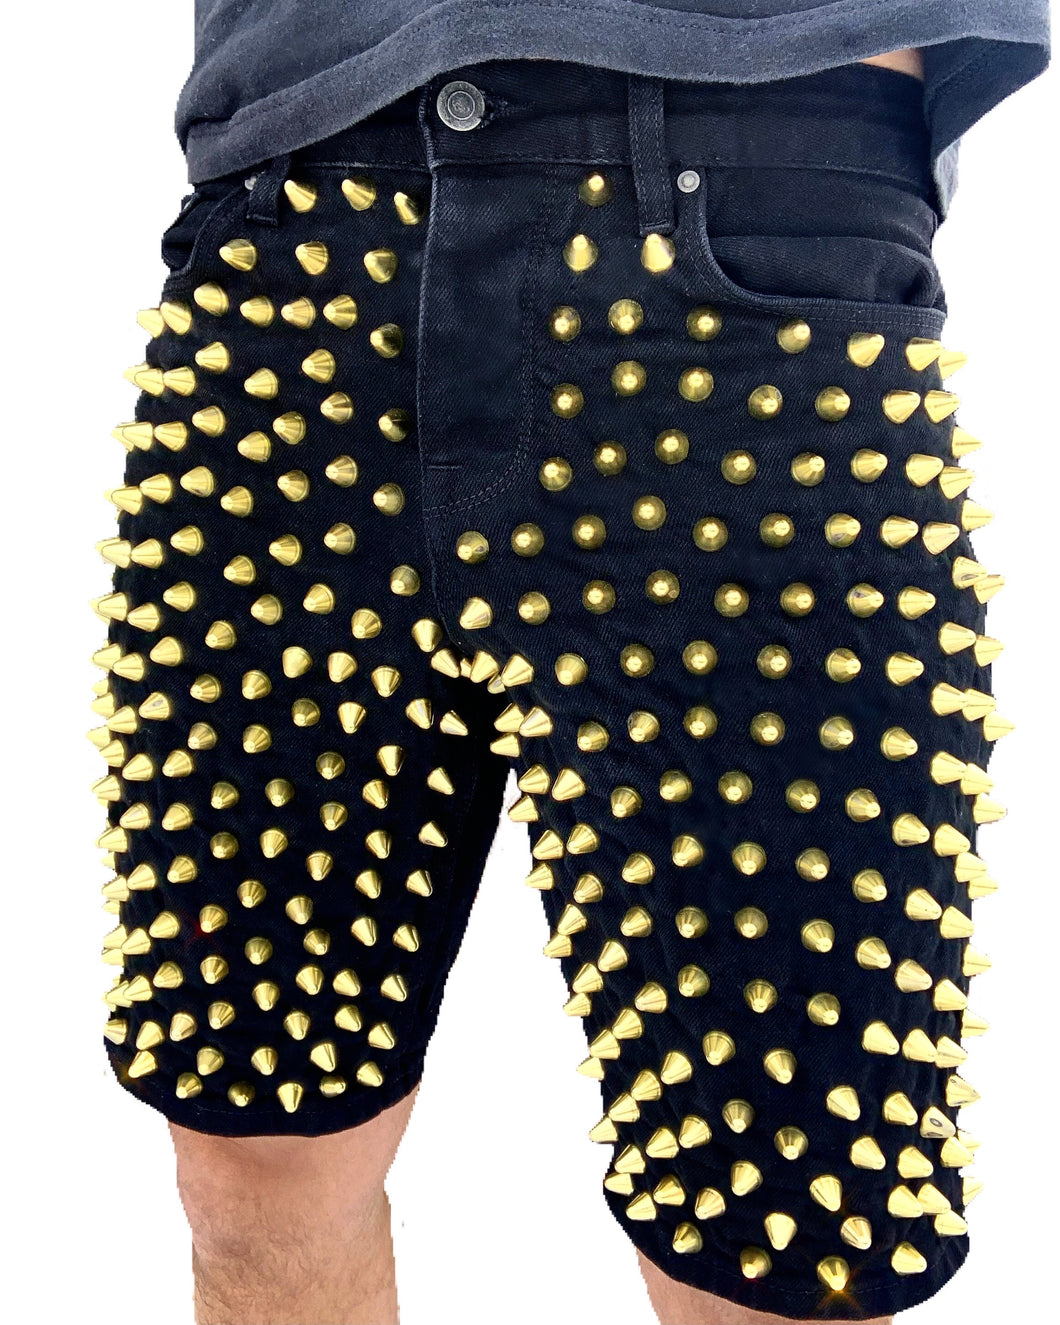 Studmuffin NYC Spike Denim Shorts - More Colors